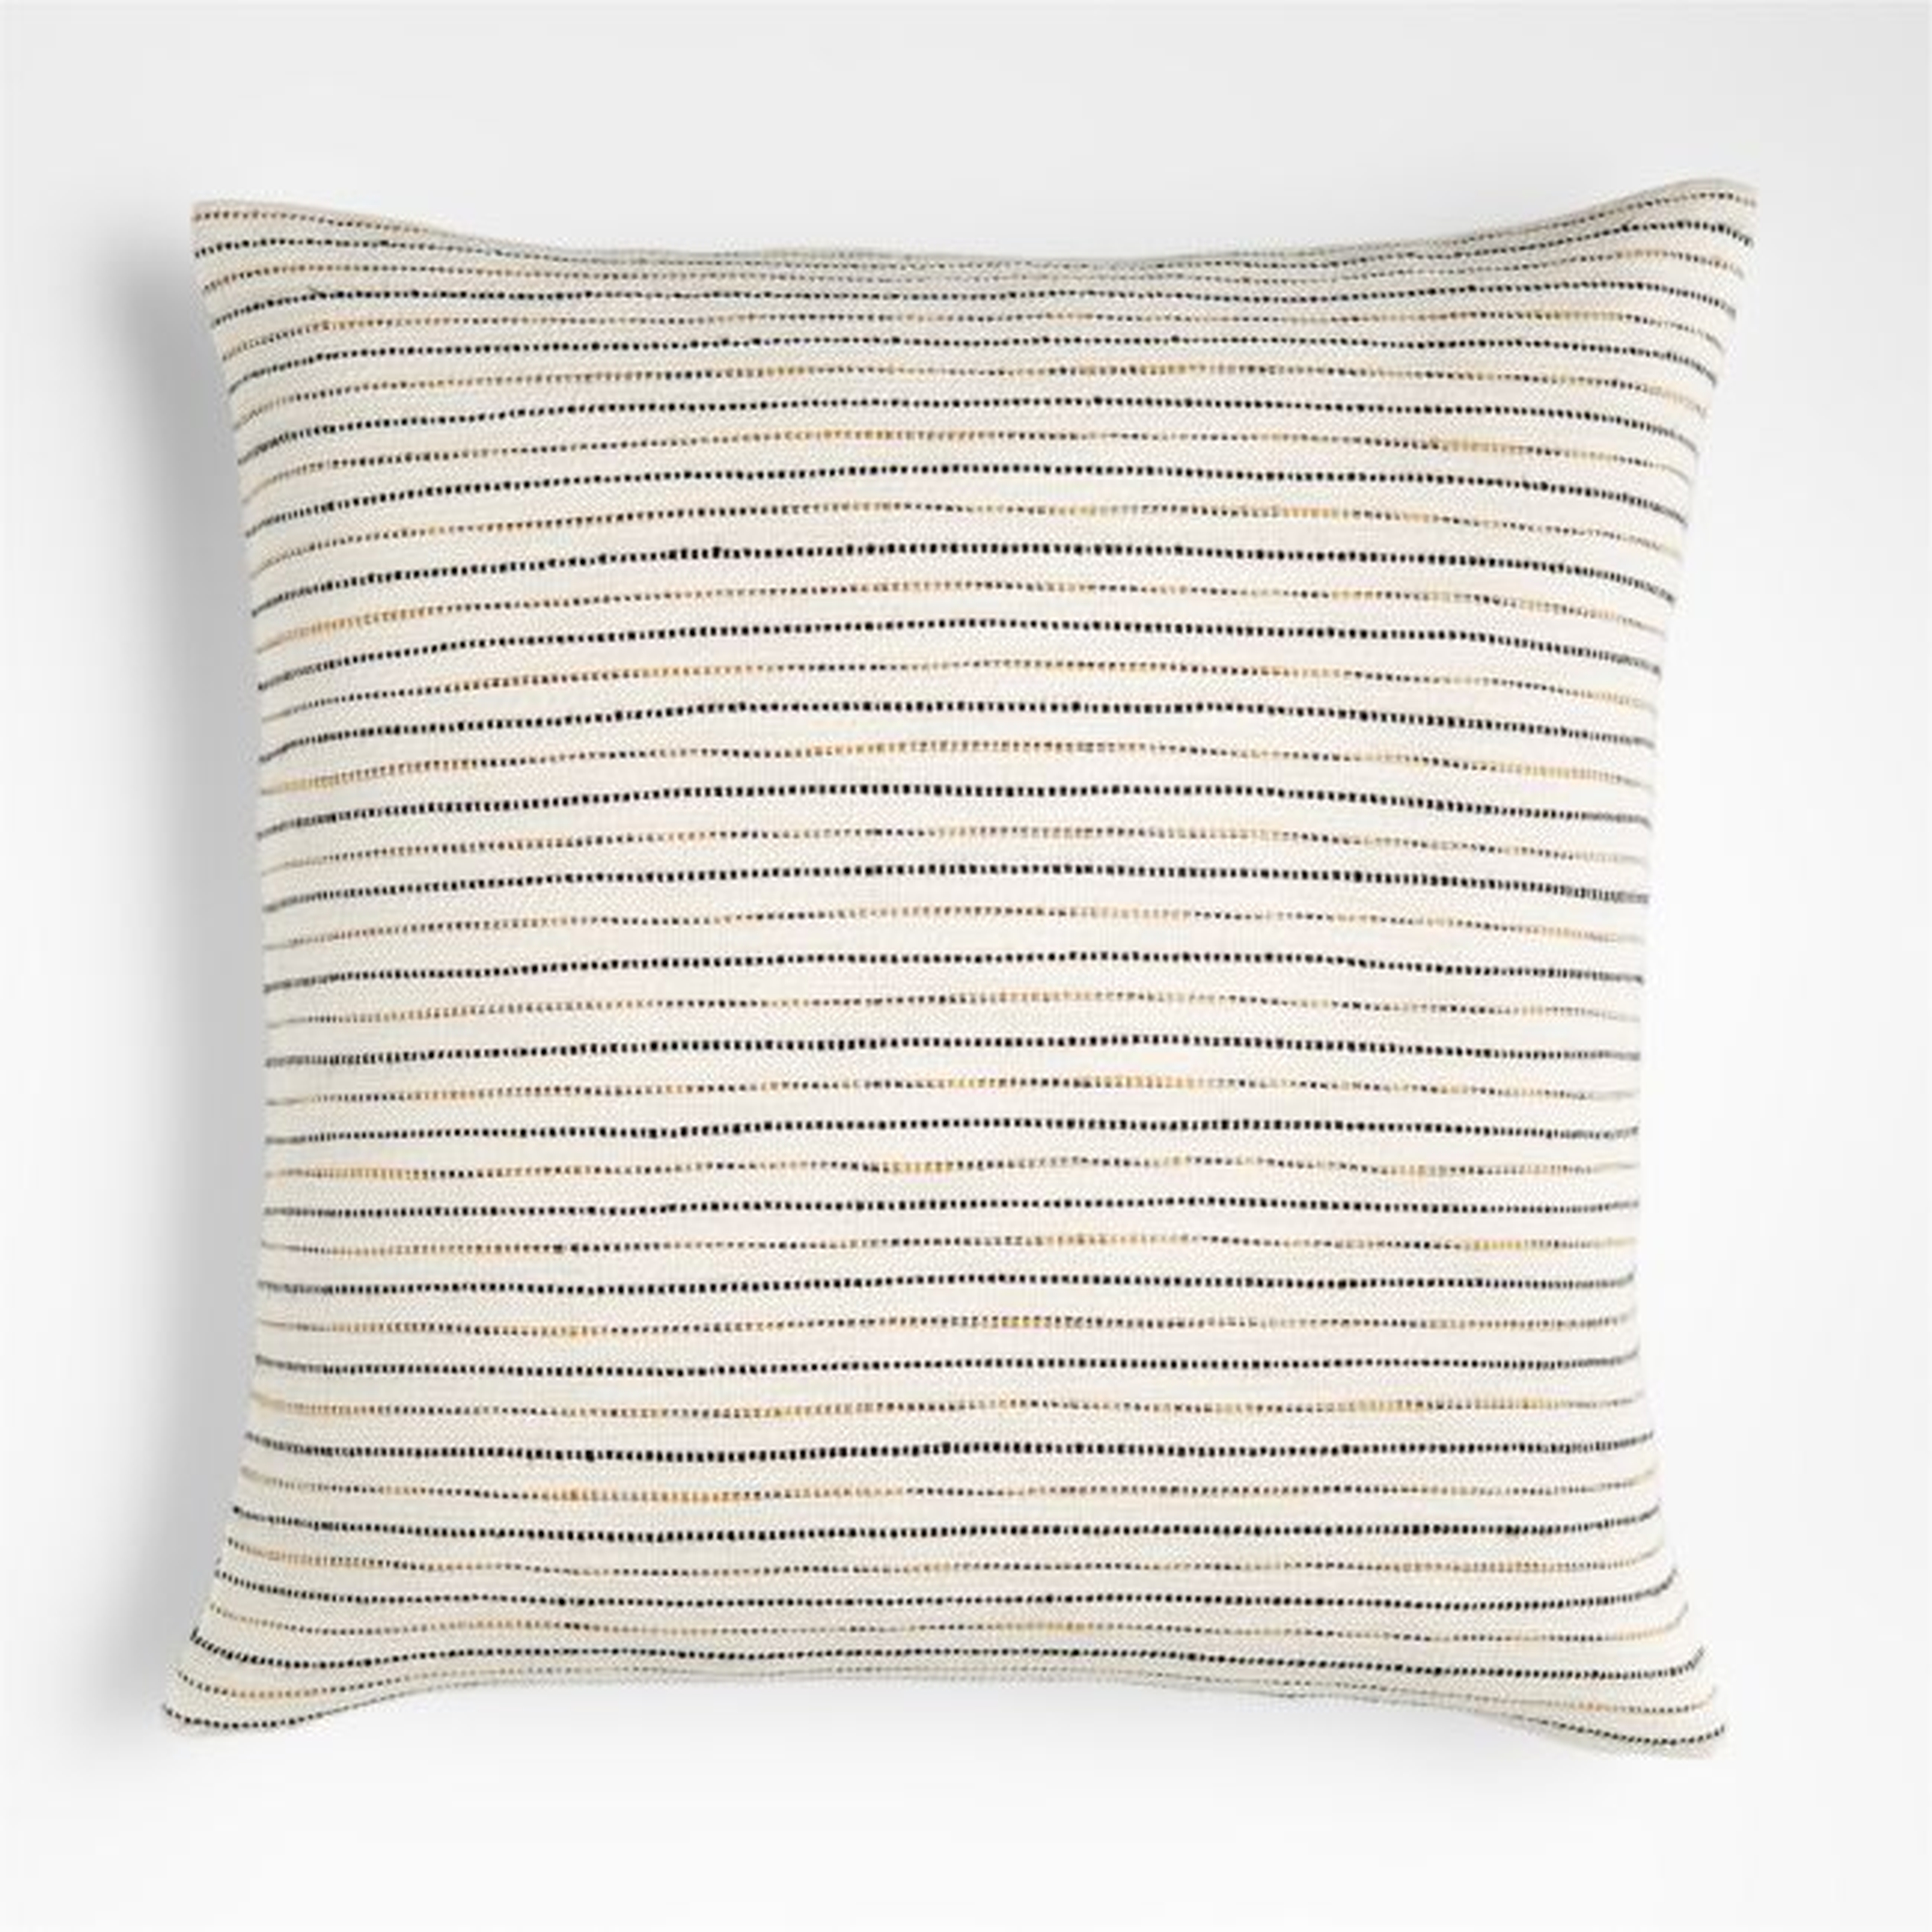 Dellana 23"x23" Striped Natural Square Throw Pillow Cover with Down-Alternative Insert - Crate and Barrel